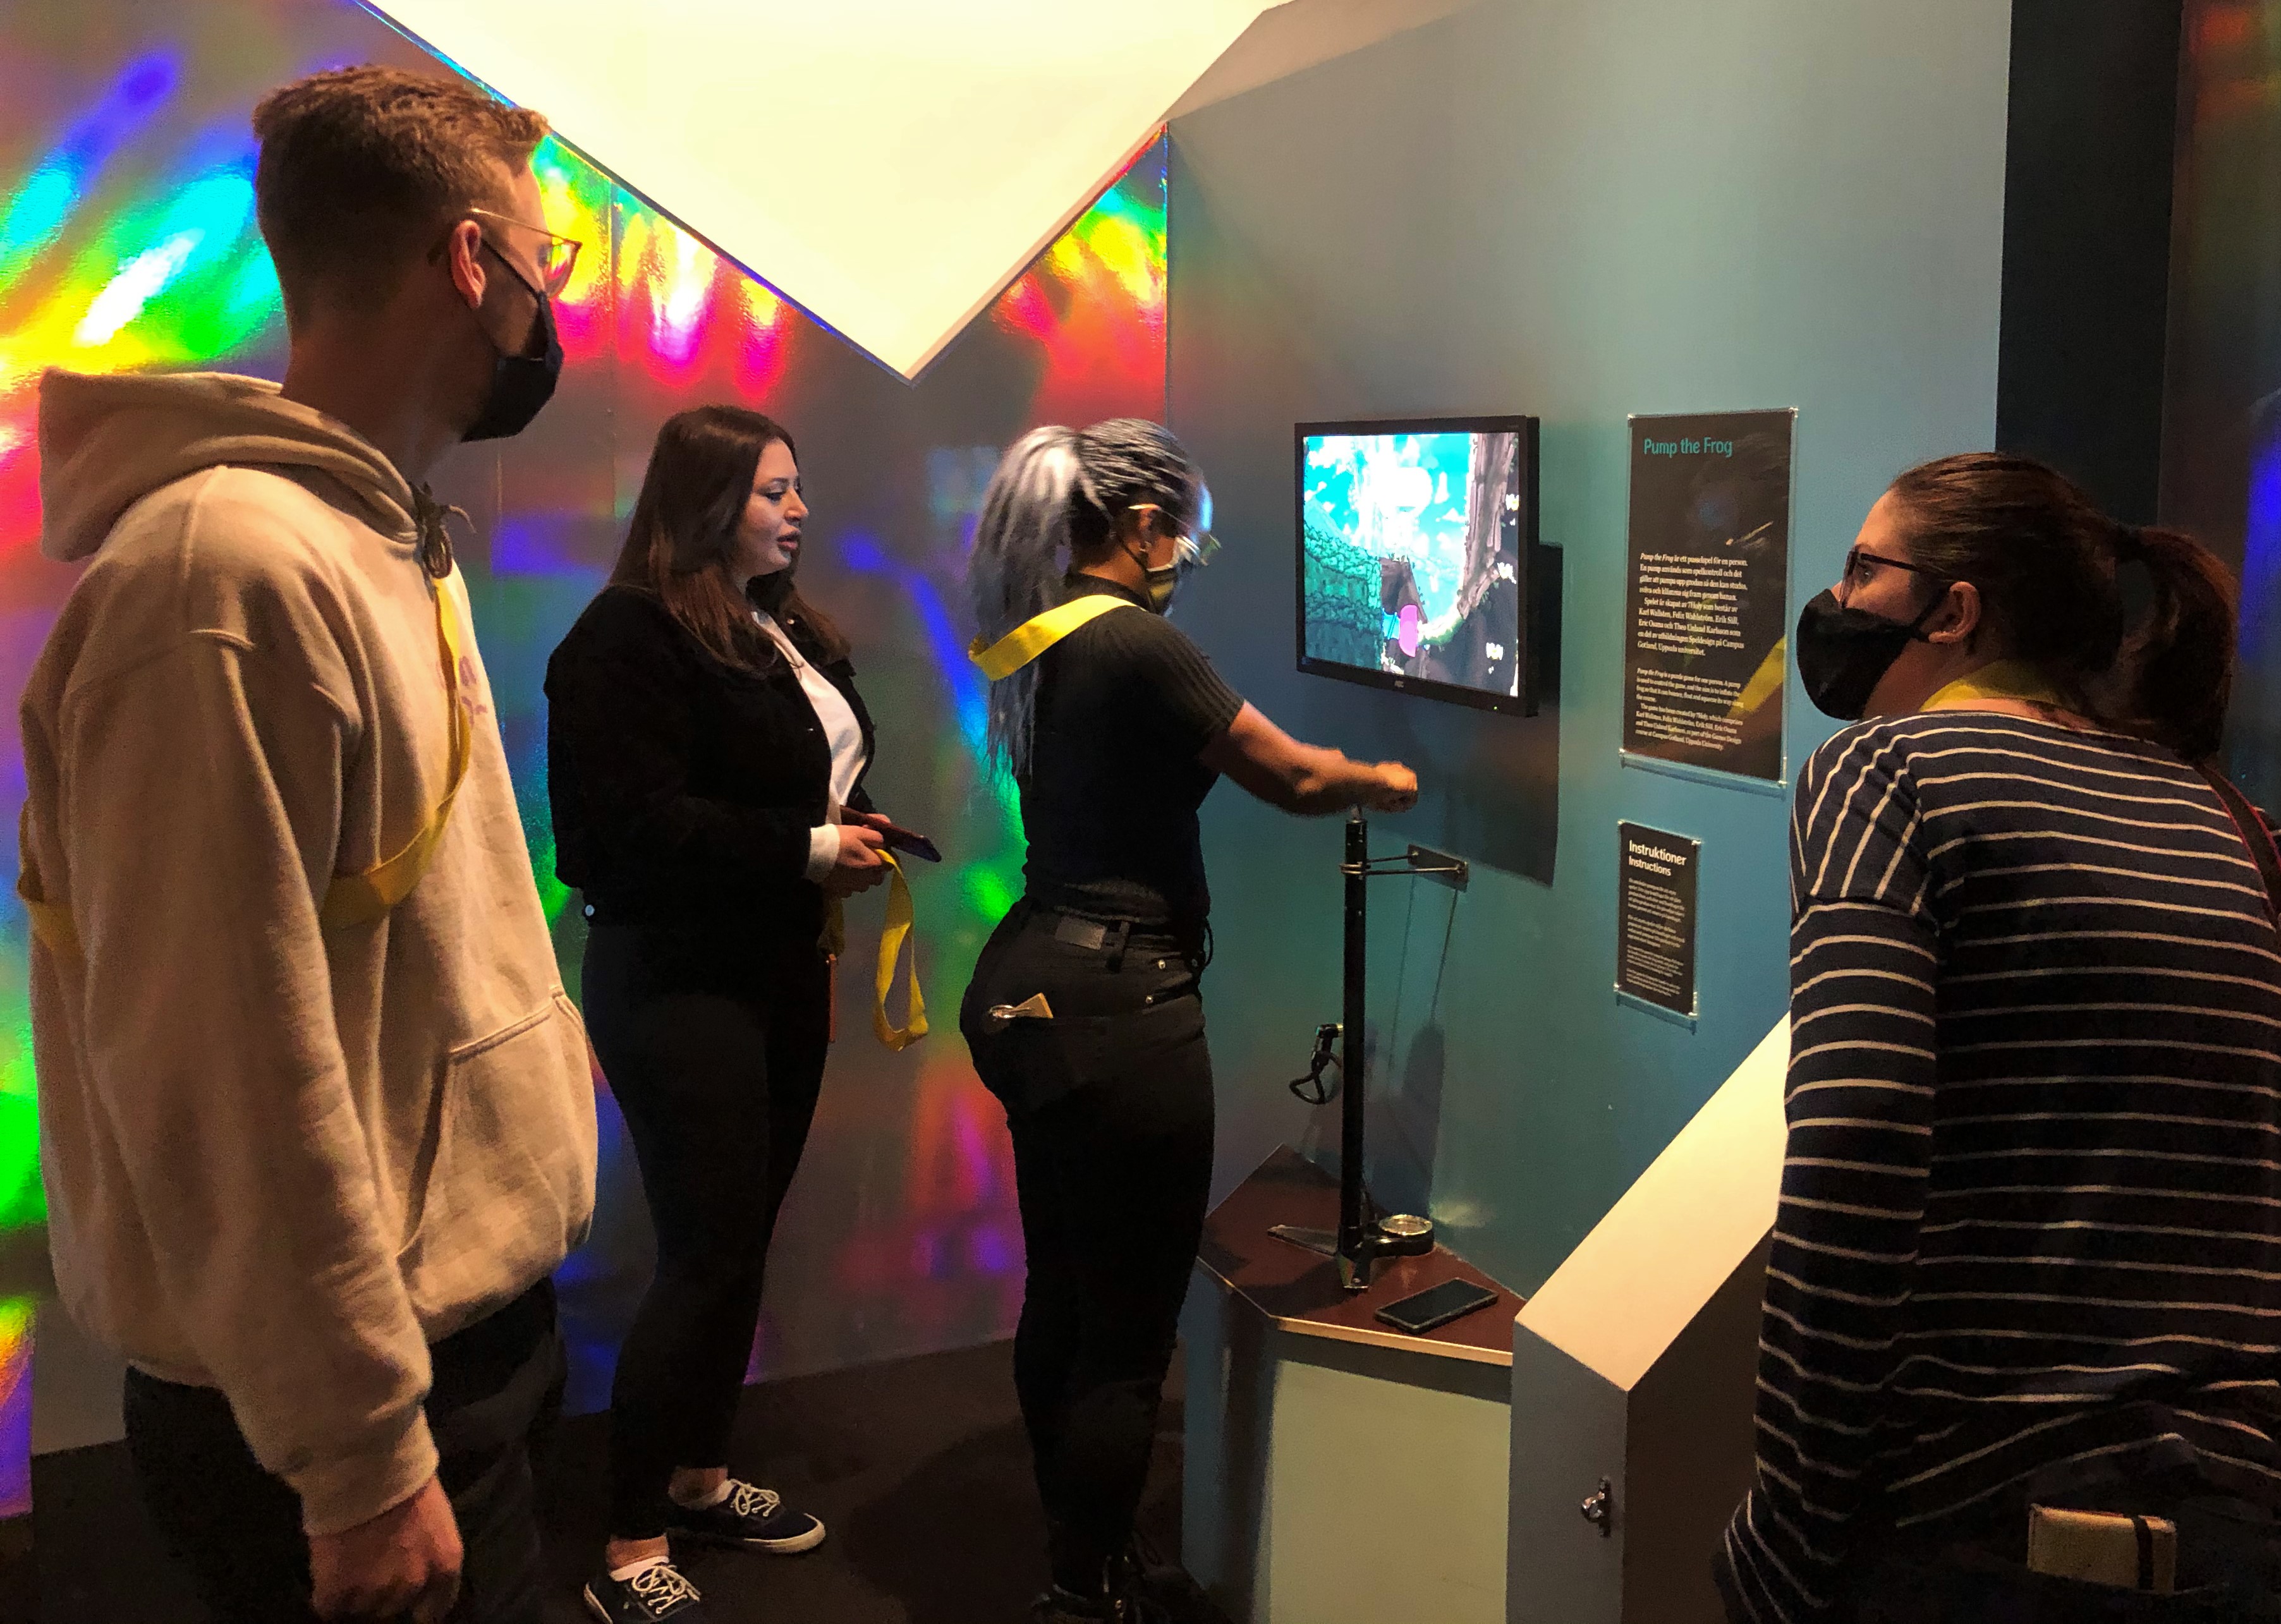 The group visiting the exhibition, playing games